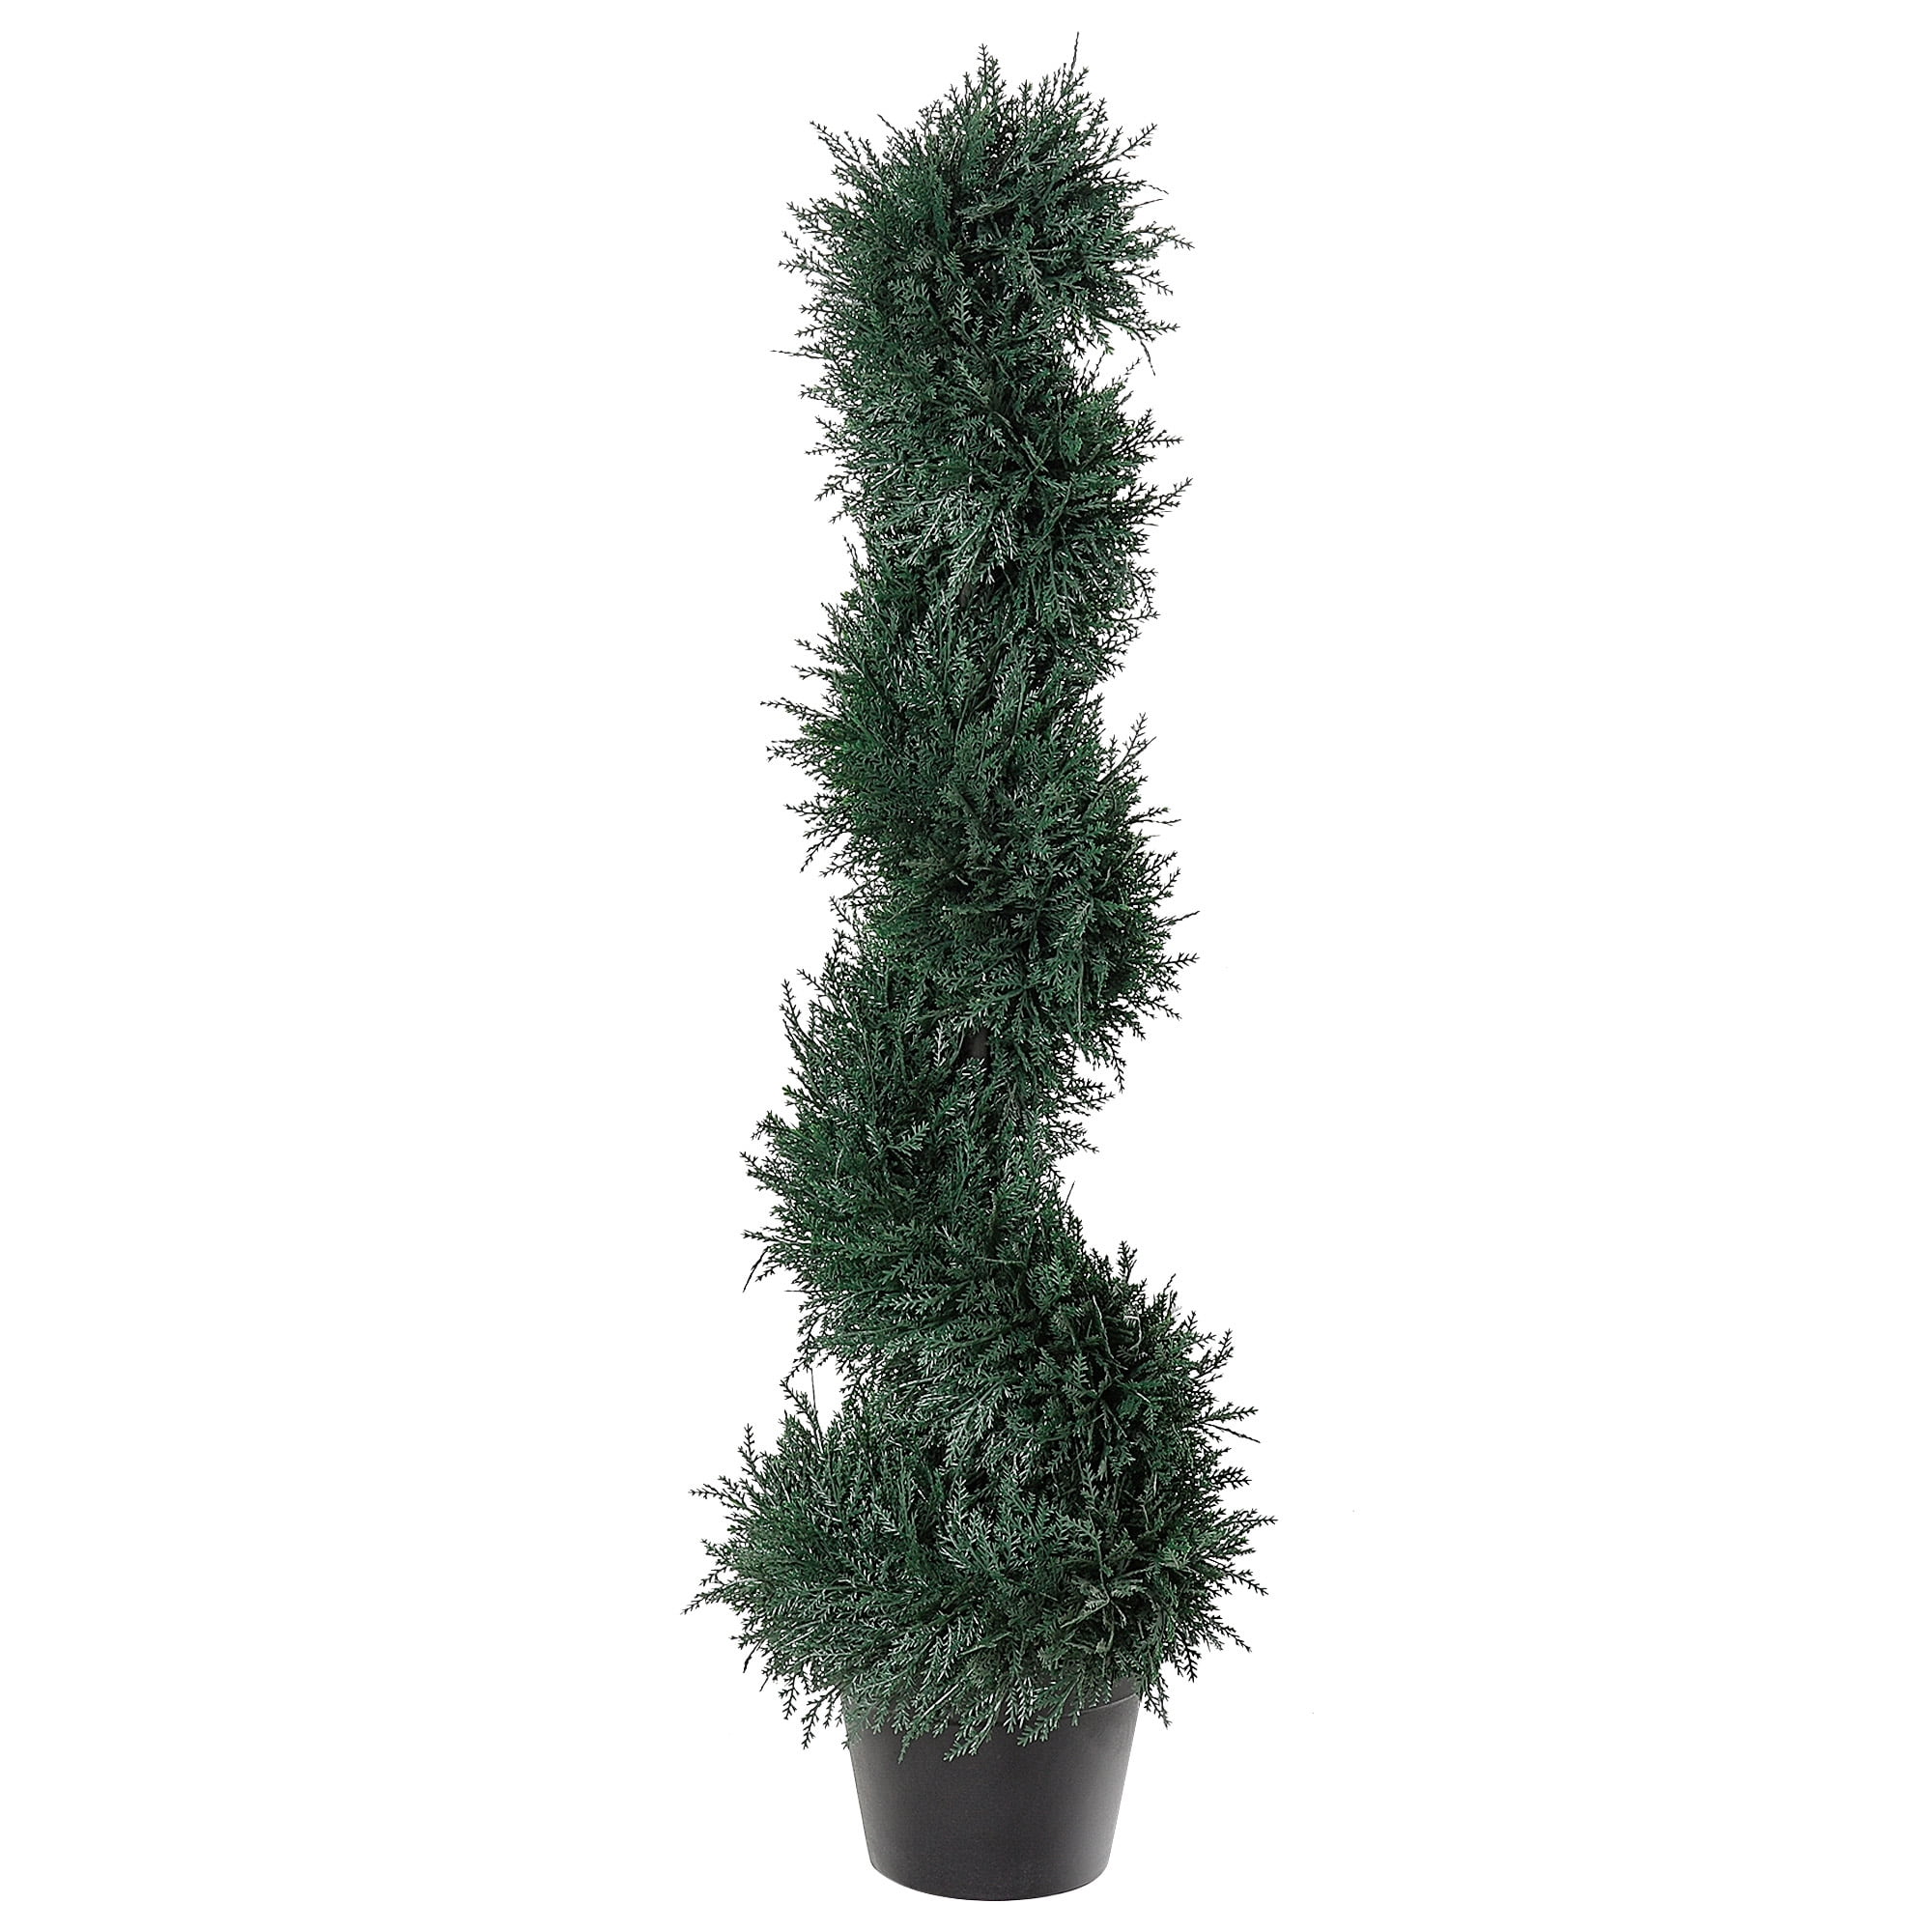 Silk Tree Warehouse Two 4 Foot 3 Inch Artificial Cypress Spiral Topiary Trees Potted Indoor or Outdoor